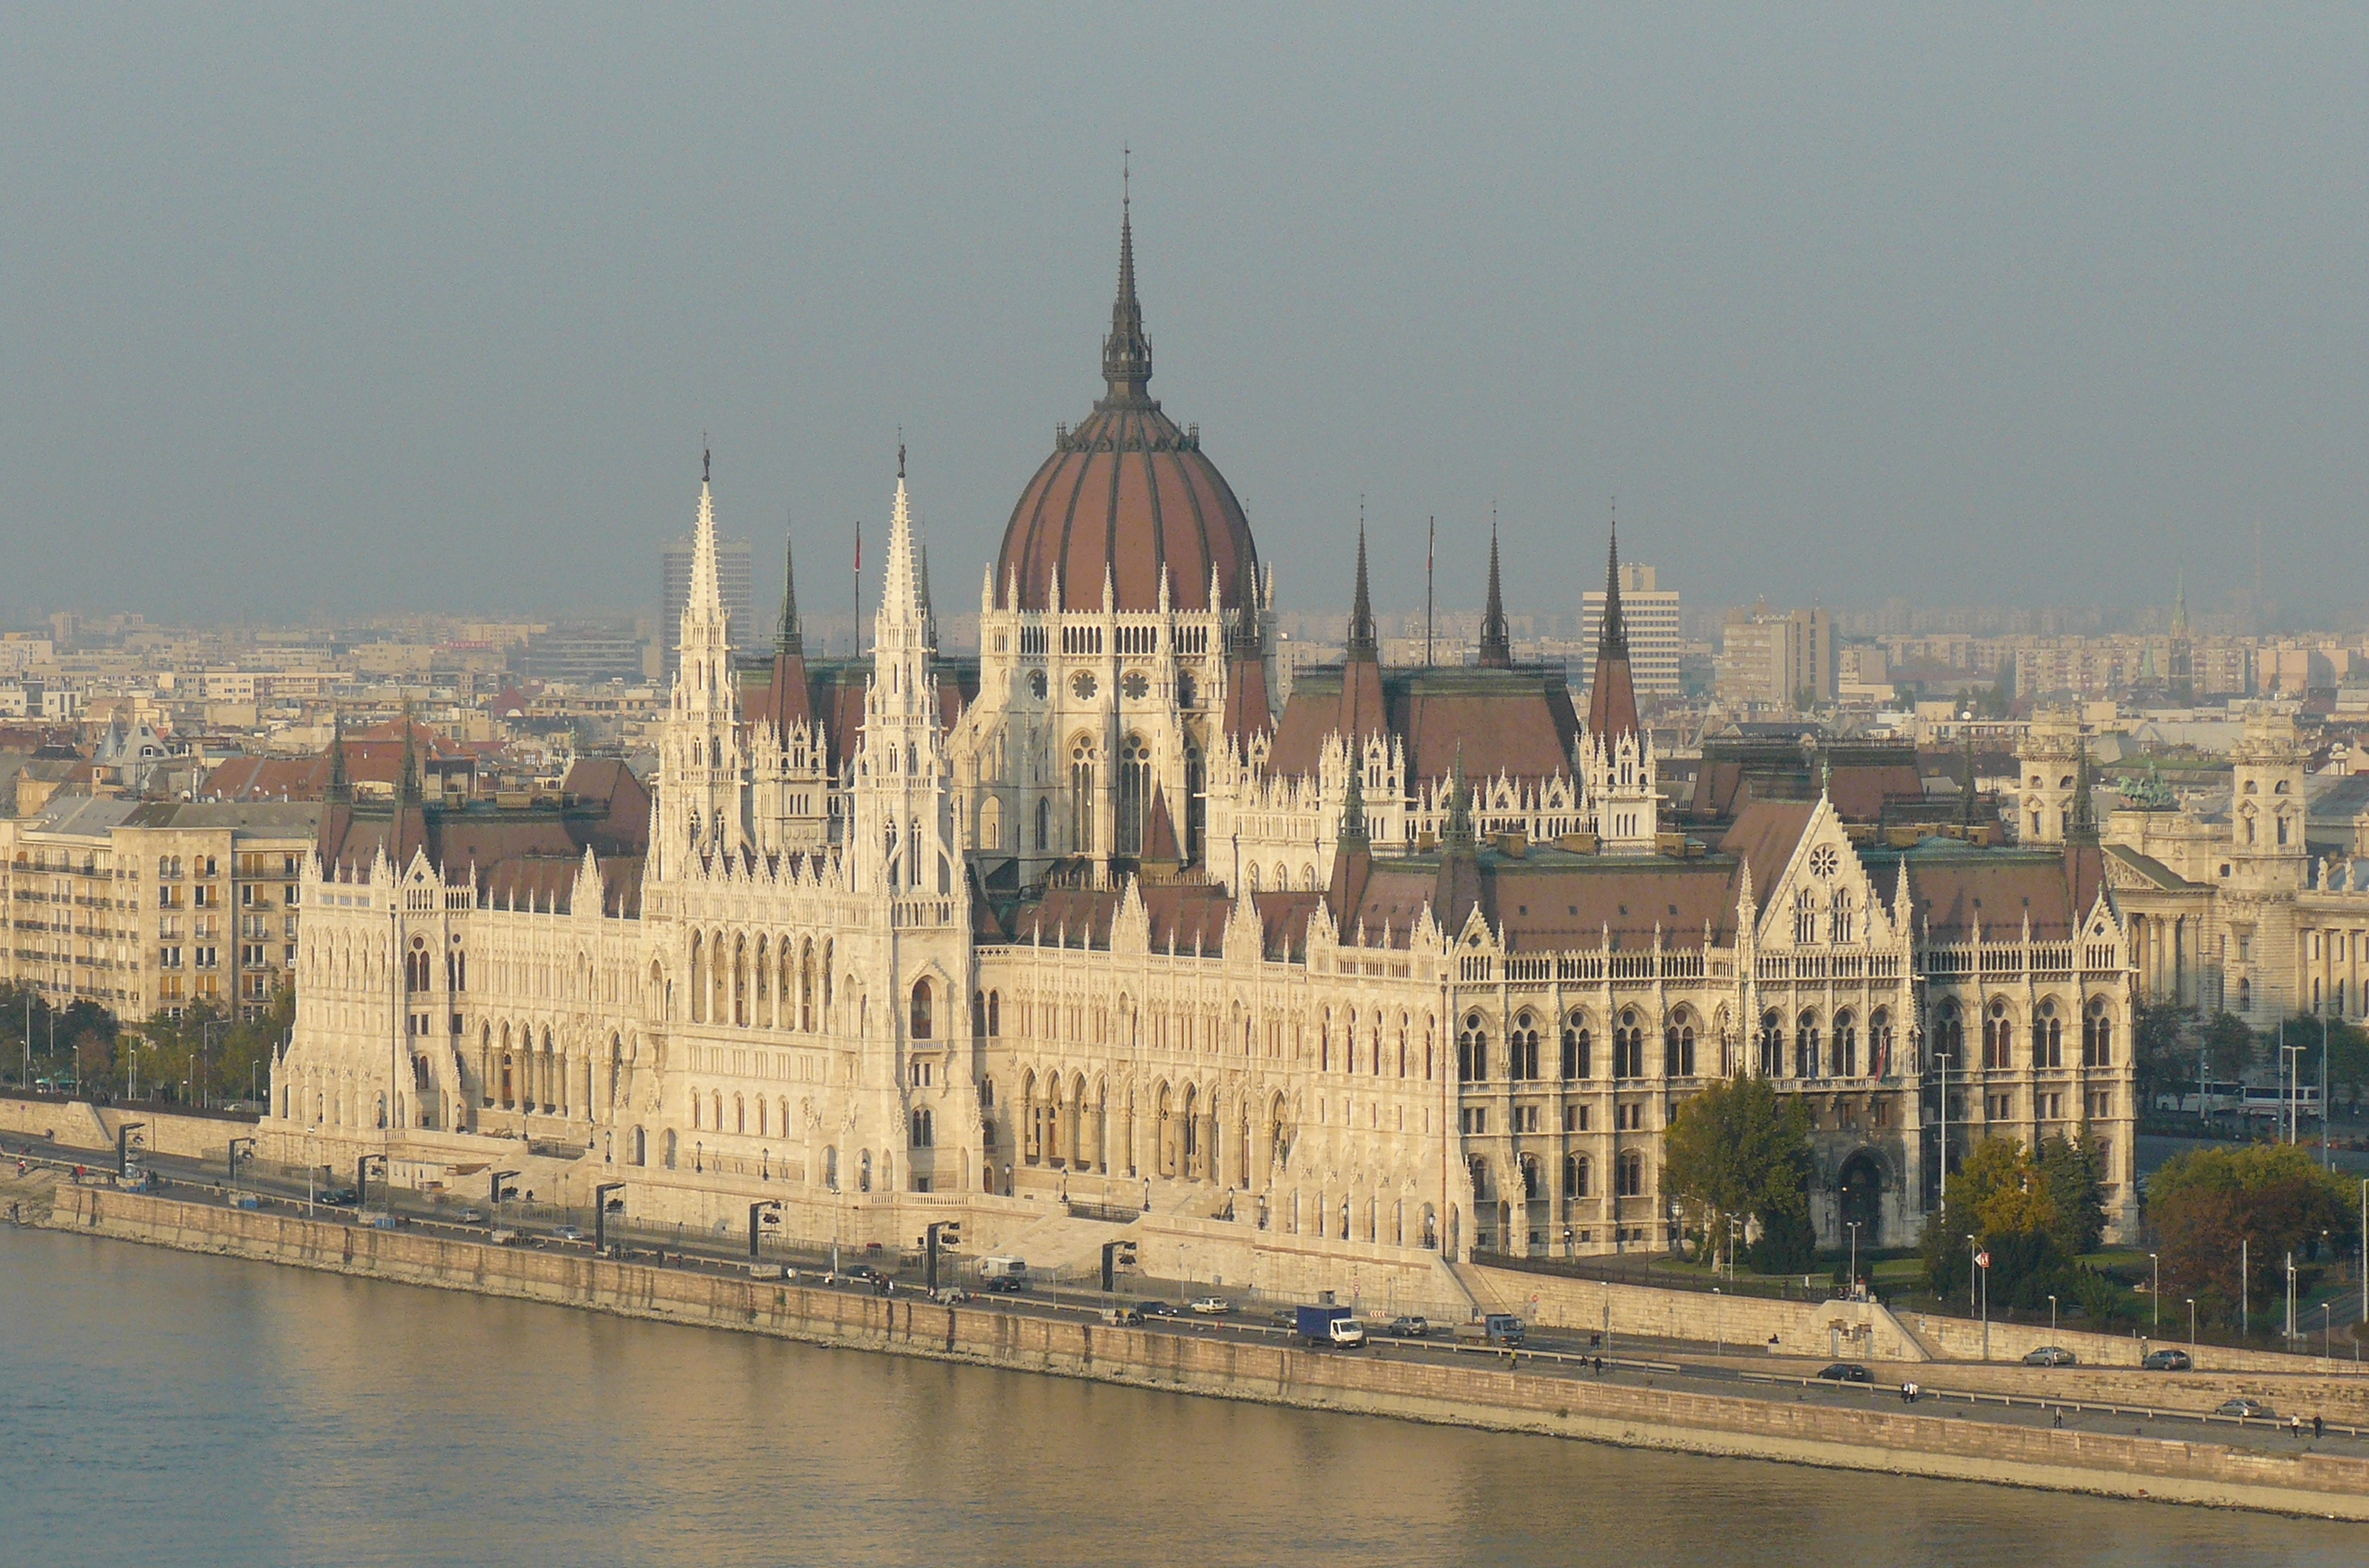 Building of the Hungarian Parliament, where is the Office of the Hungarian Prime Minister. View from Buda castle, 2009.